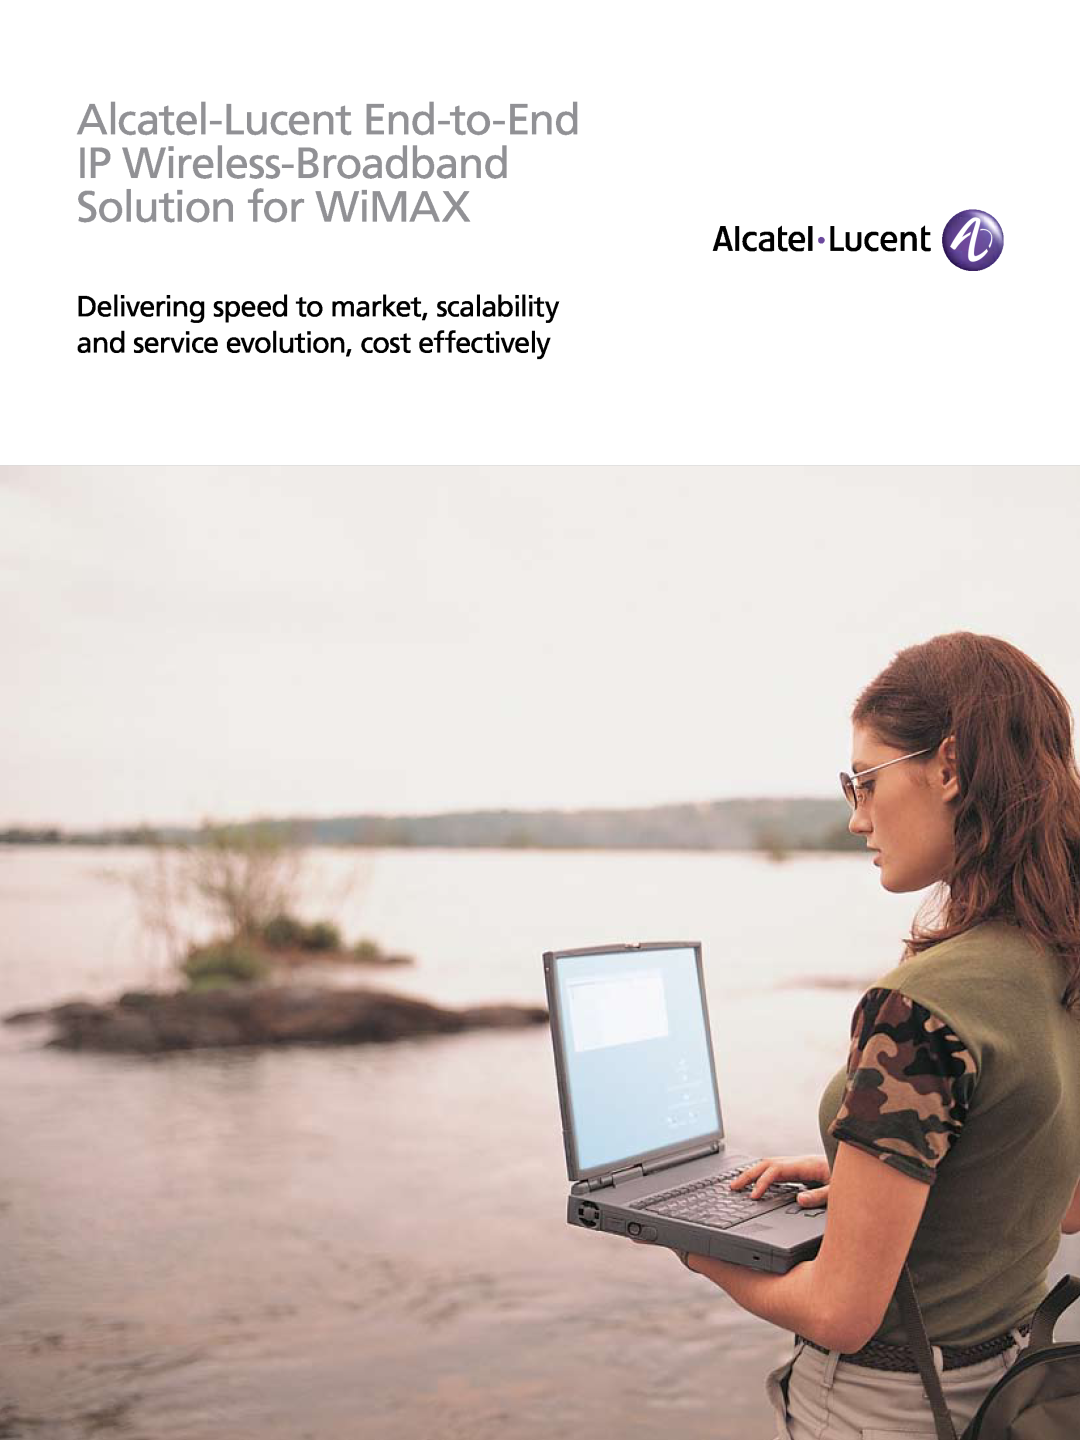 Alcatel-Lucent manual Alcatel-Lucent End-to-End IP Wireless-Broadband Solution for WiMAX 